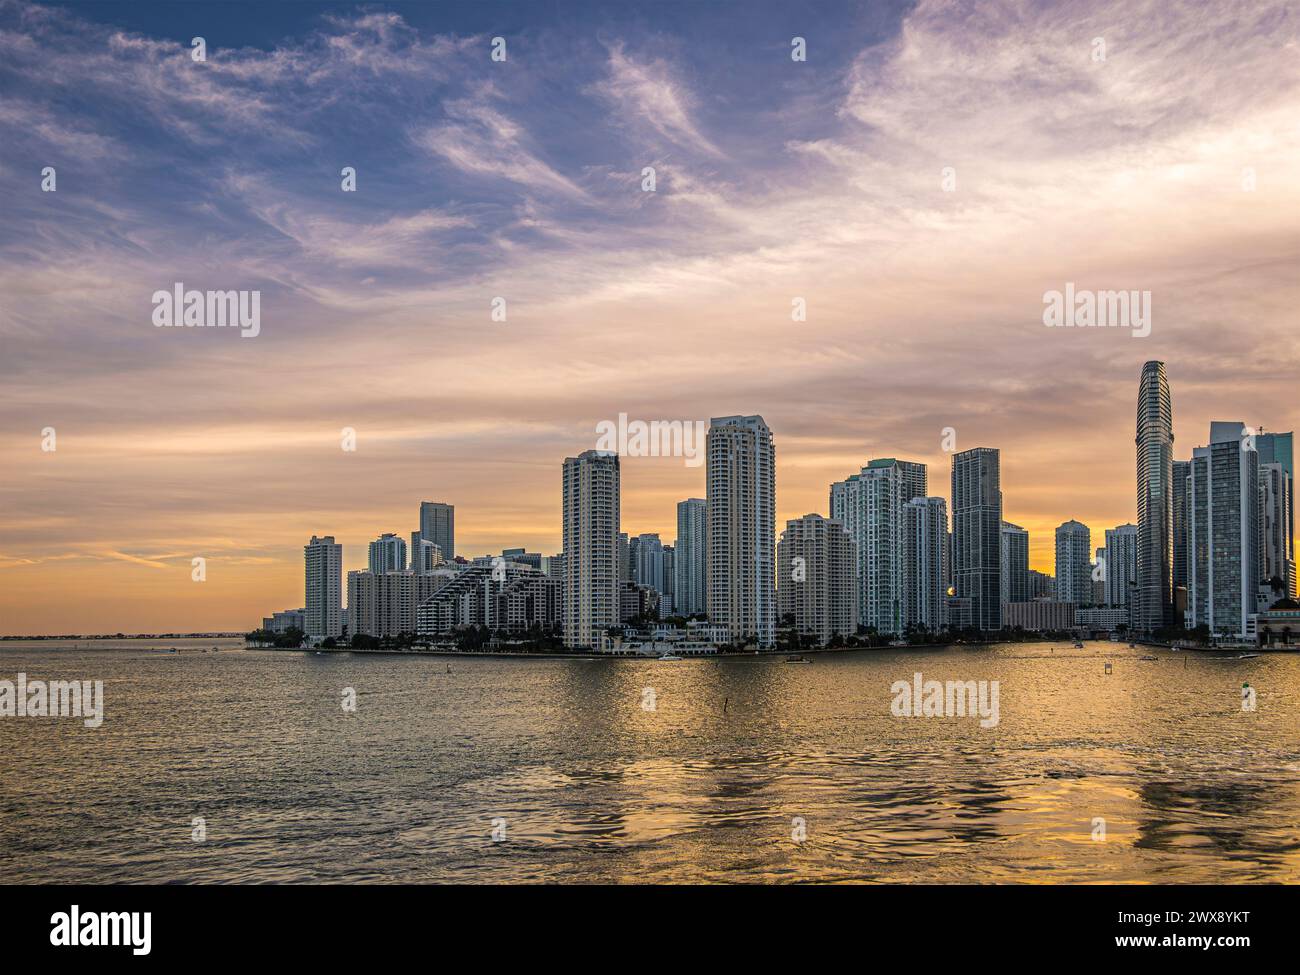 Miami, Florida, USA - July 29, 2023: Wide shot. Sunset sky over buildings on Brickell Key island at evening 19:43. Tequesta points in center. Both sid Stock Photo